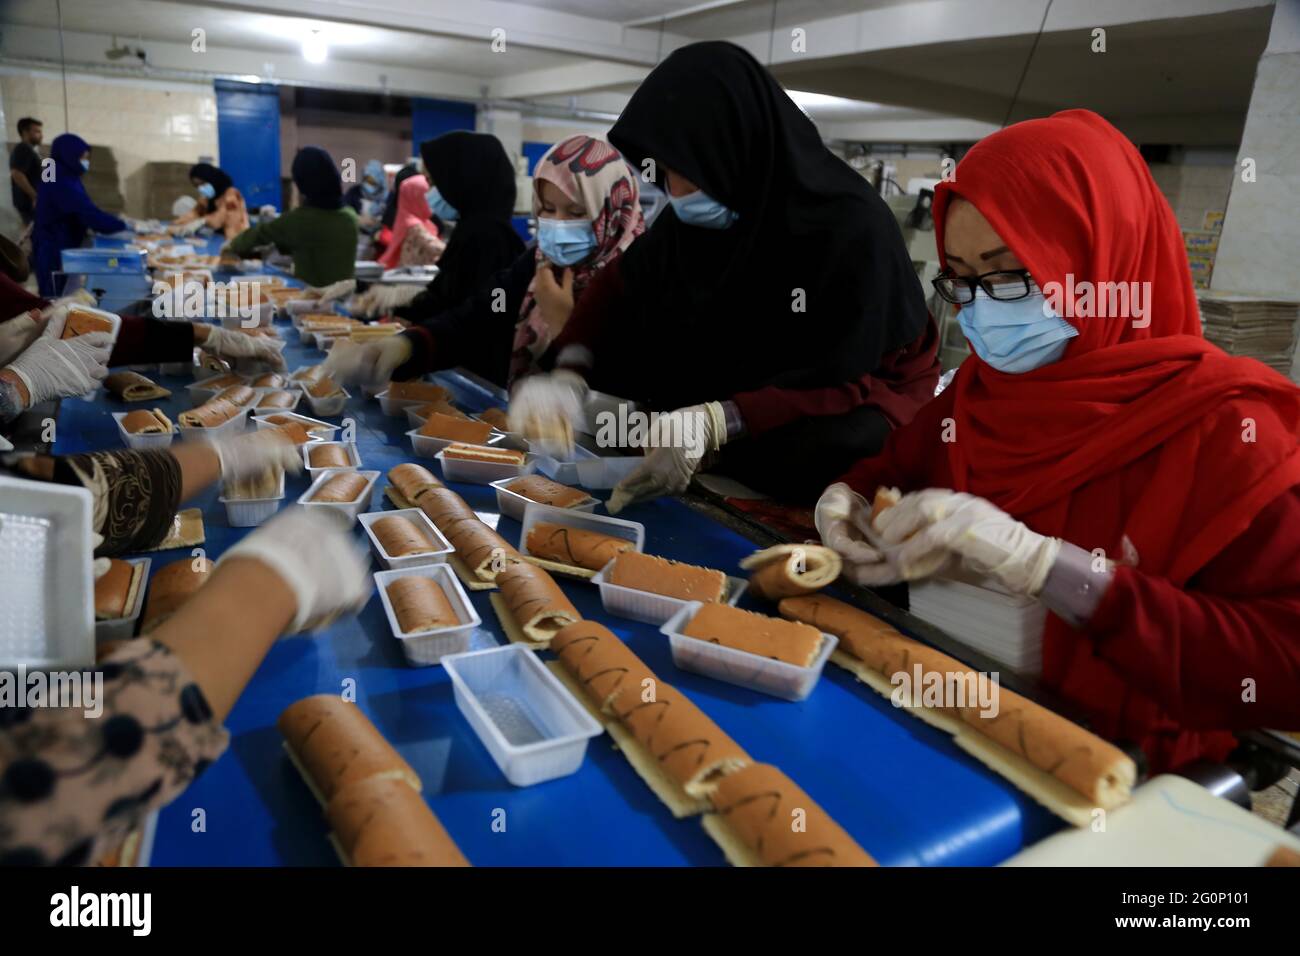 Herat, Afghanistan. 2nd June, 2021. Afghan women work at a cake factory in an industrial park in Herat province, Afghanistan, on June 1, 2021. Peace and security in Herat city has facilitated investors to pour their capital into more than 300 plants. In the industrial park of the western Herat province, more than 300 factories and plants are operational to produce a variety of items ranging from food stuff to detergent and construction materials. Credit: Arif Karimi/Xinhua/Alamy Live News Stock Photo